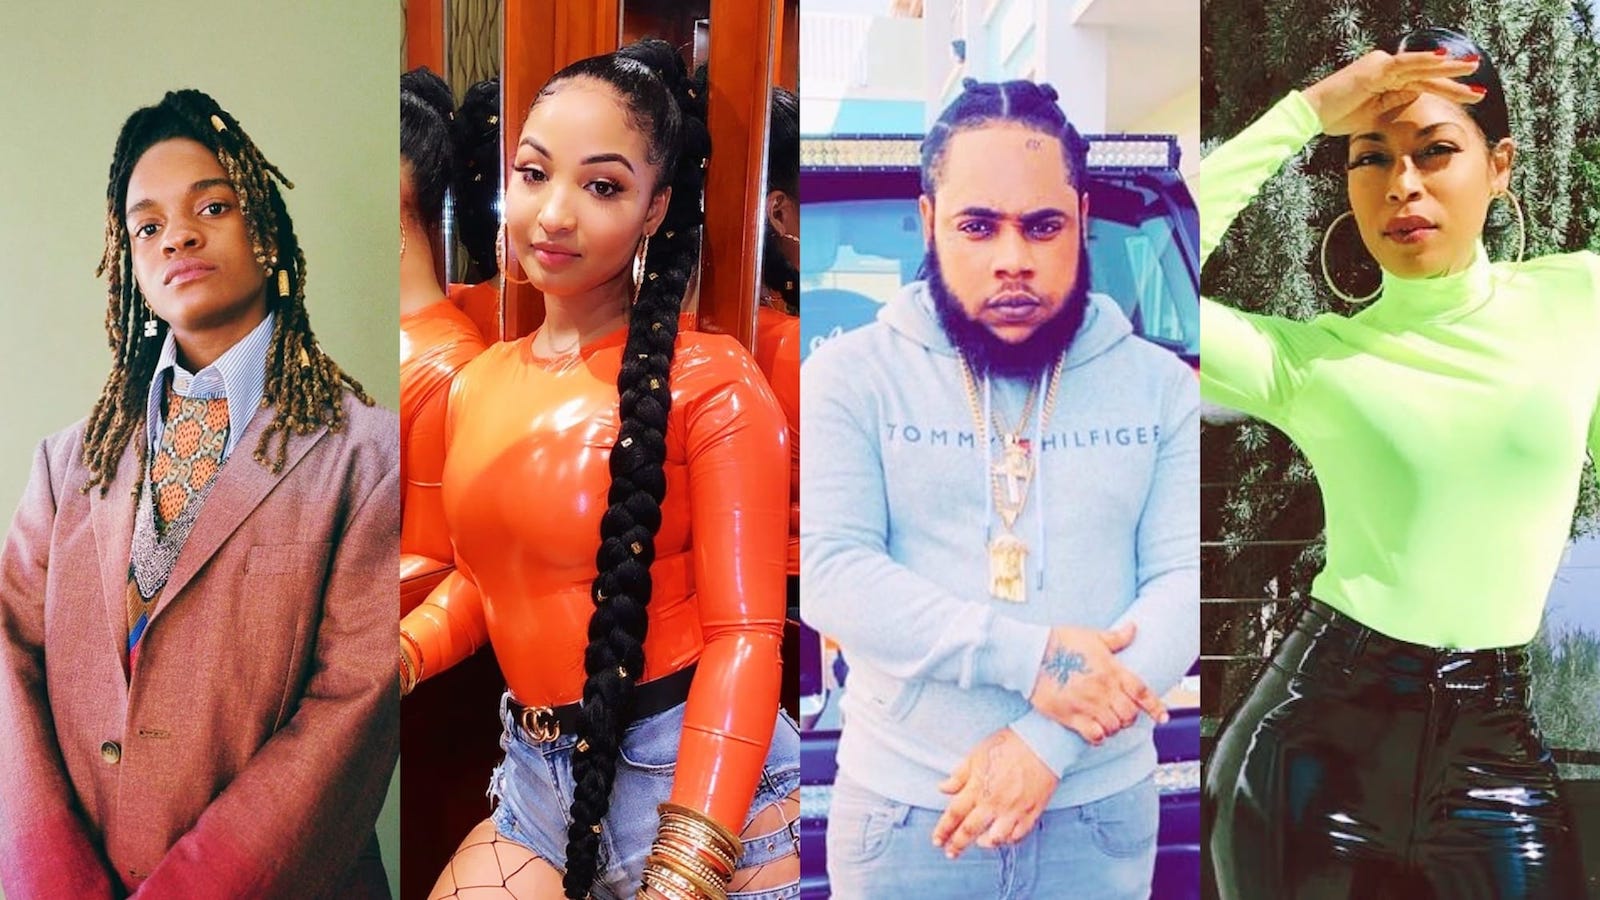 Koffee, Shenseea, Squash And Tosh Alexander To Perform During Super Bowl Weekend In Miami